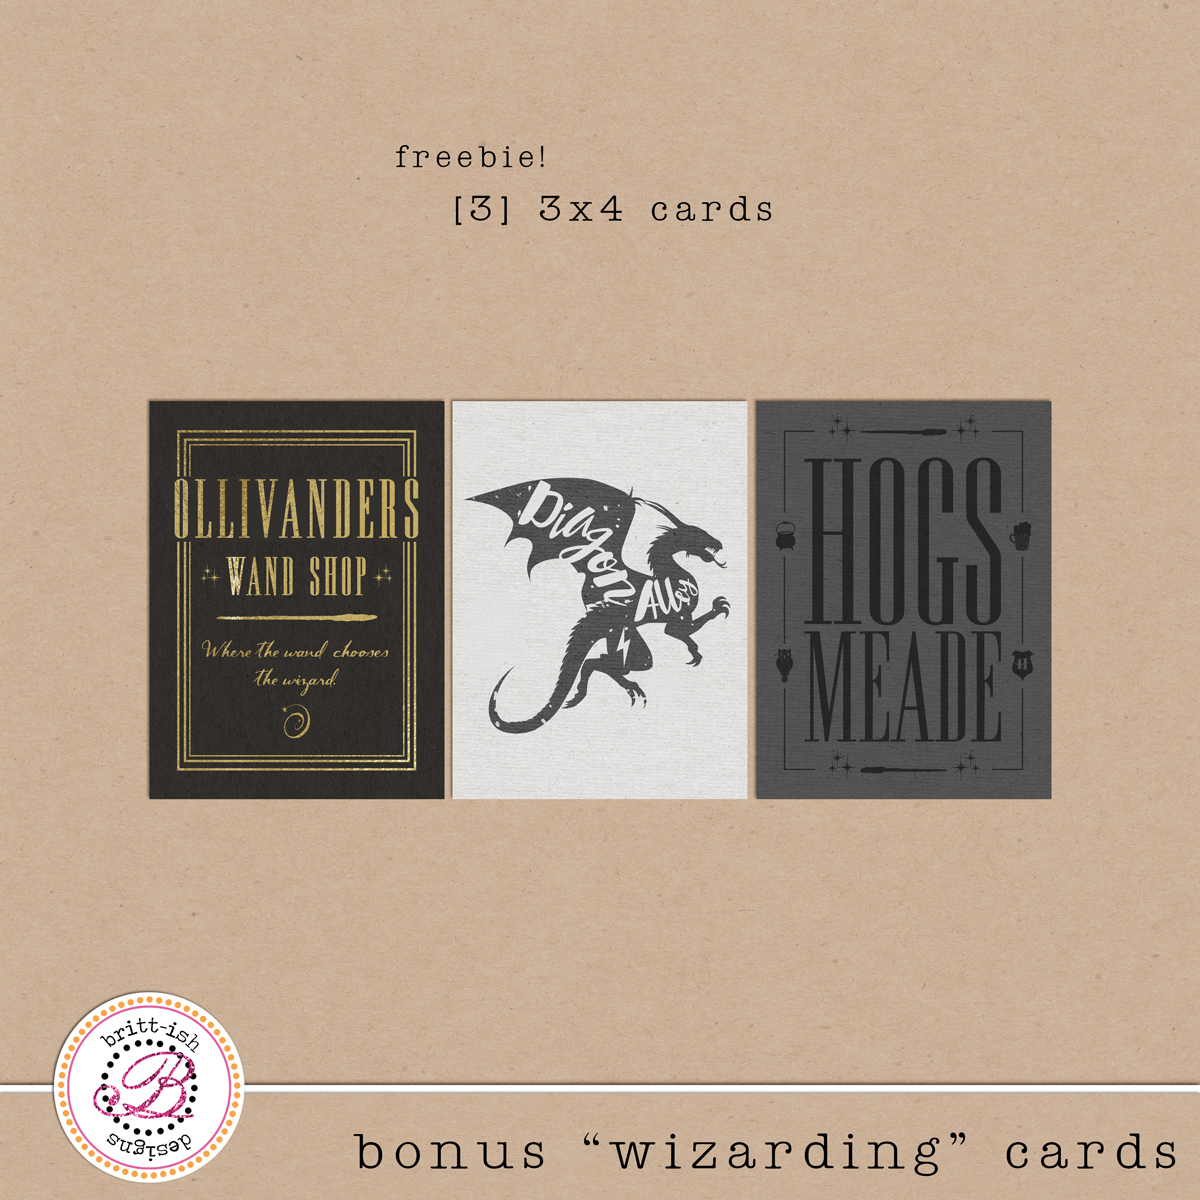 Bonus "Wizarding" Journal Cards by Britt-ish Designs - Perfect for documenting your Project Life, Harry Potter, Wizarding World moments!!